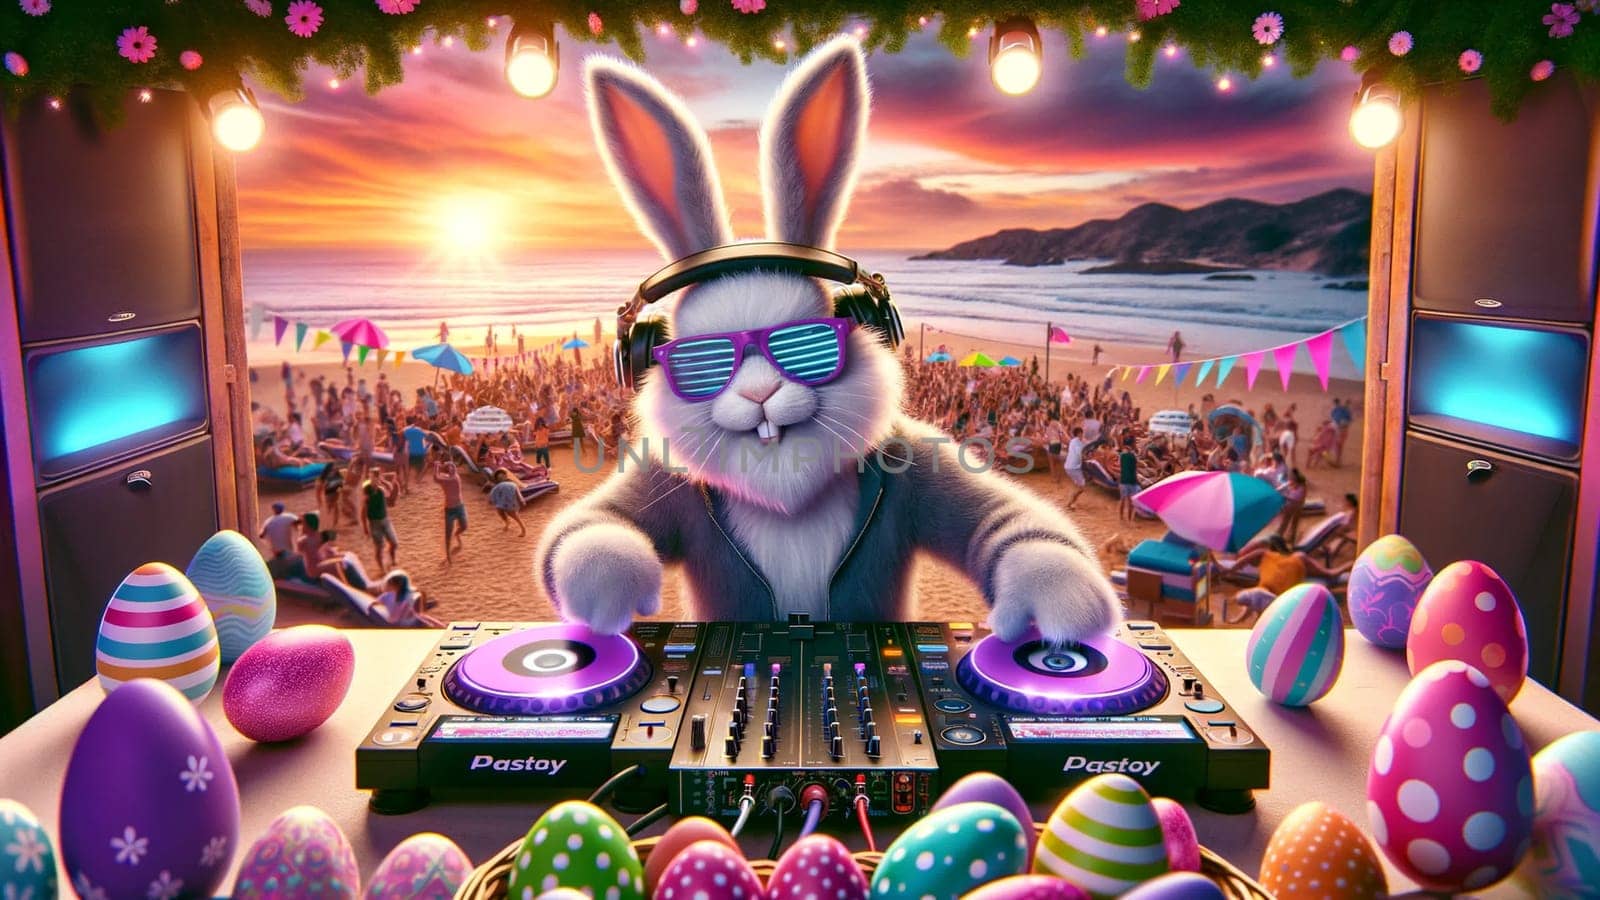 A DJ Easter Bunny with neon sunglasses spins records at a beach party with Easter eggs and decorations on the DJ booth, as the sun sets in the background. by Designlab